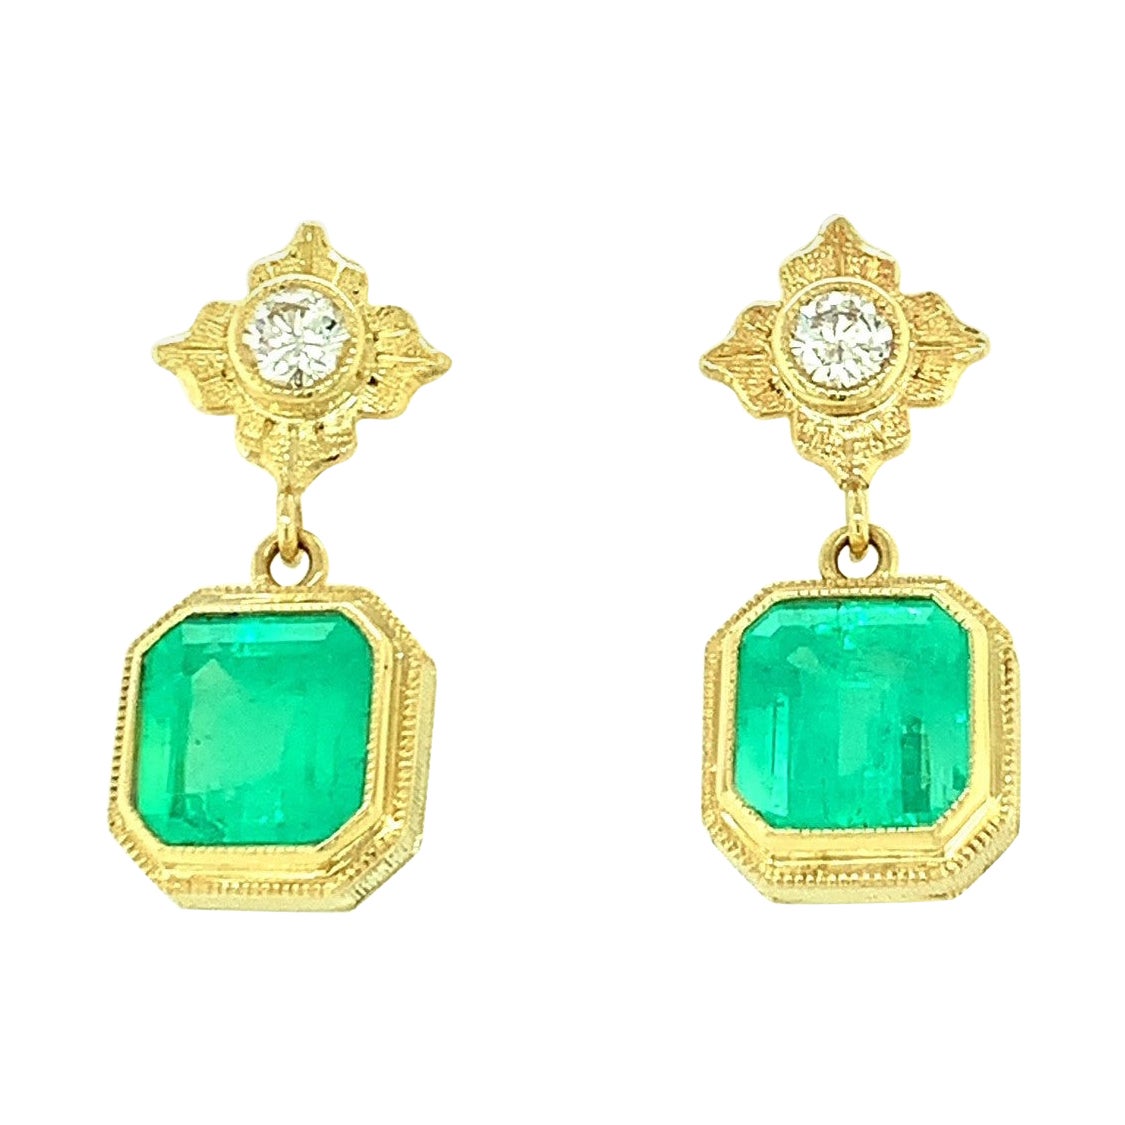 These handmade emerald and diamond earrings are a statement of classic elegance that will have you turning heads wherever you go. Two gorgeous square-cut emeralds have been set in rich 18k yellow gold bezels to show off their fine color and quality.